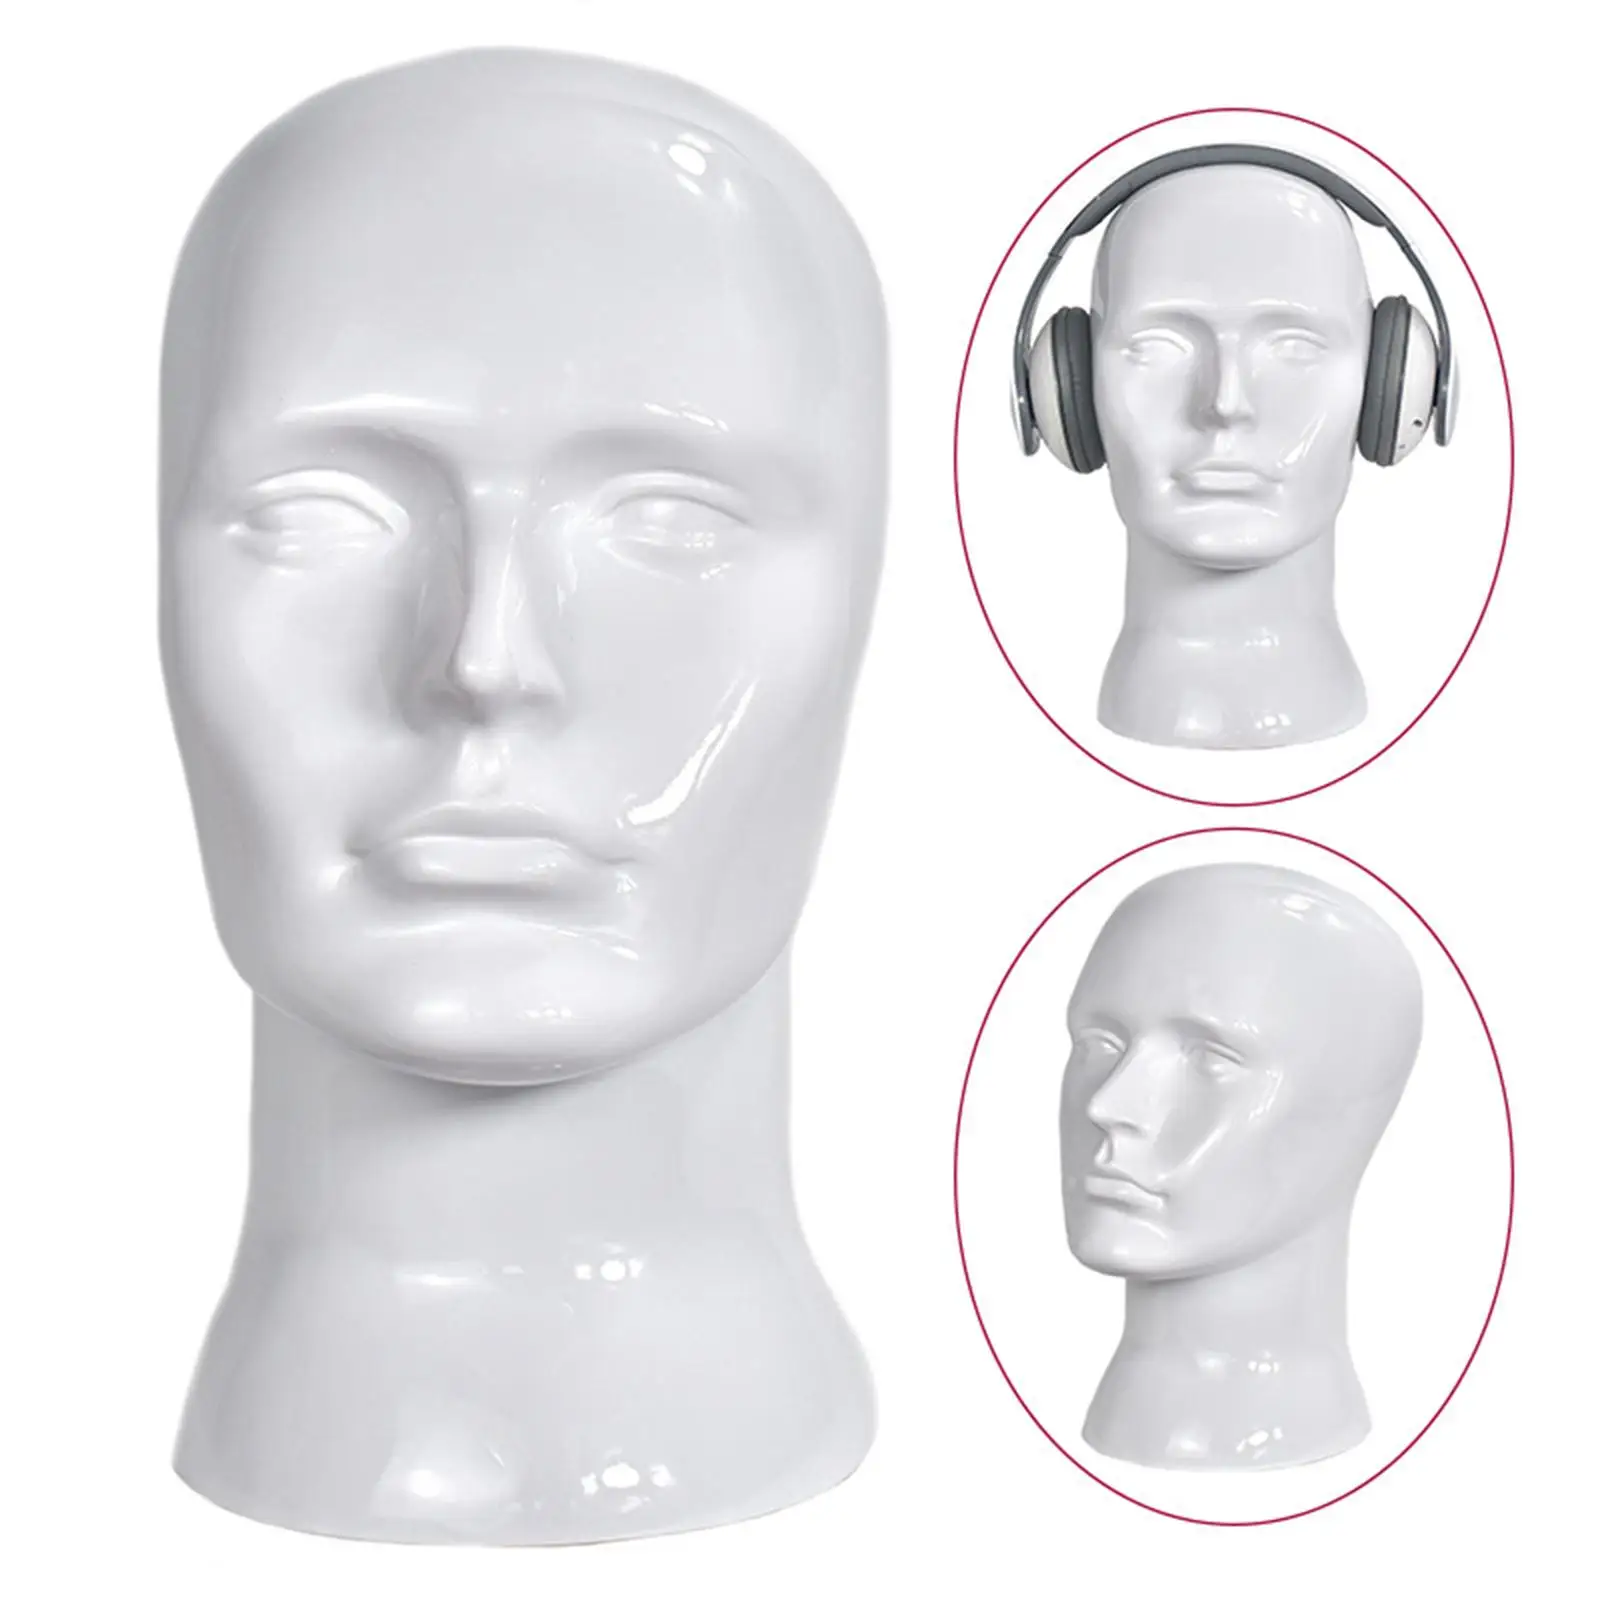 Mannequin Head Sturdy Display Holder for Shopping Mall Display Jewellery